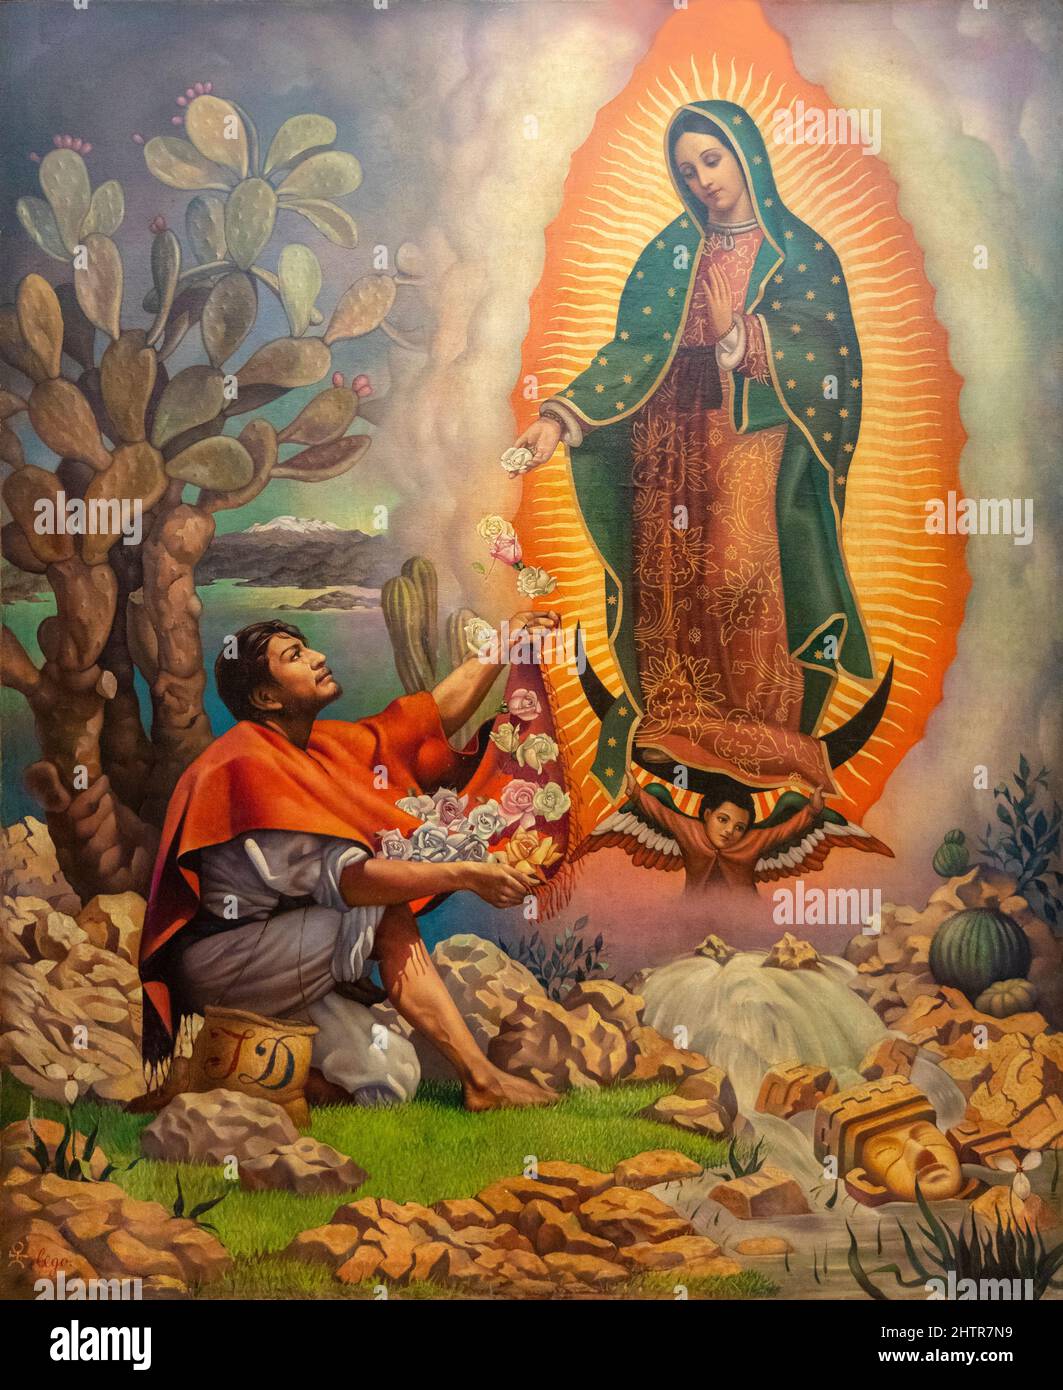 The Virgin of Guadalupe, the Virgin Mary appeared to Juan Diego, a man of Aztec descent who had converted to Christianity, on December 9, 1531. Soumay Stock Photo